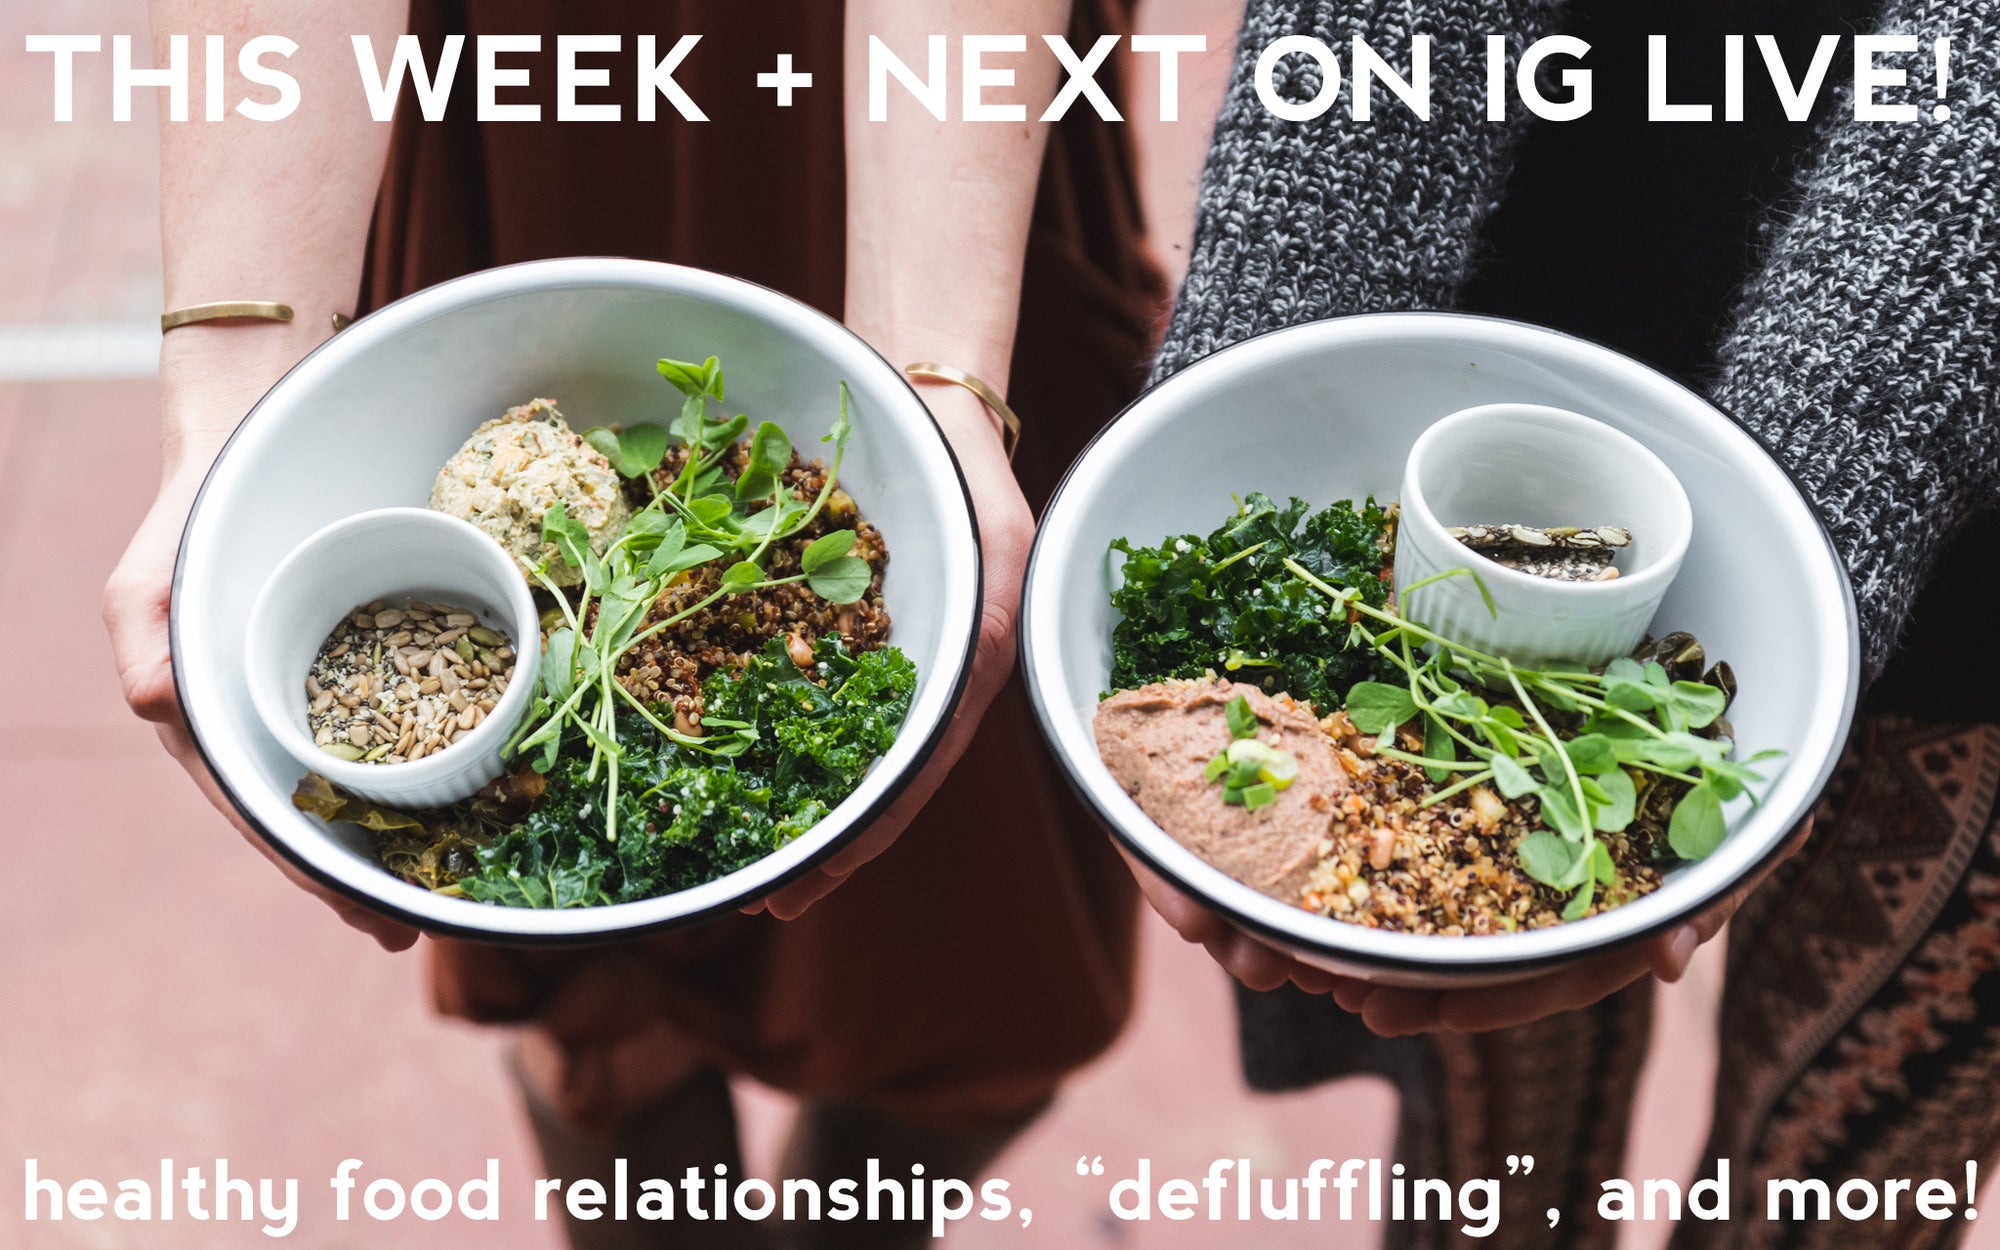 Healing our relationships with food through veganism, some smart advice on Summer Defluffing, and more - this week on Instagram!